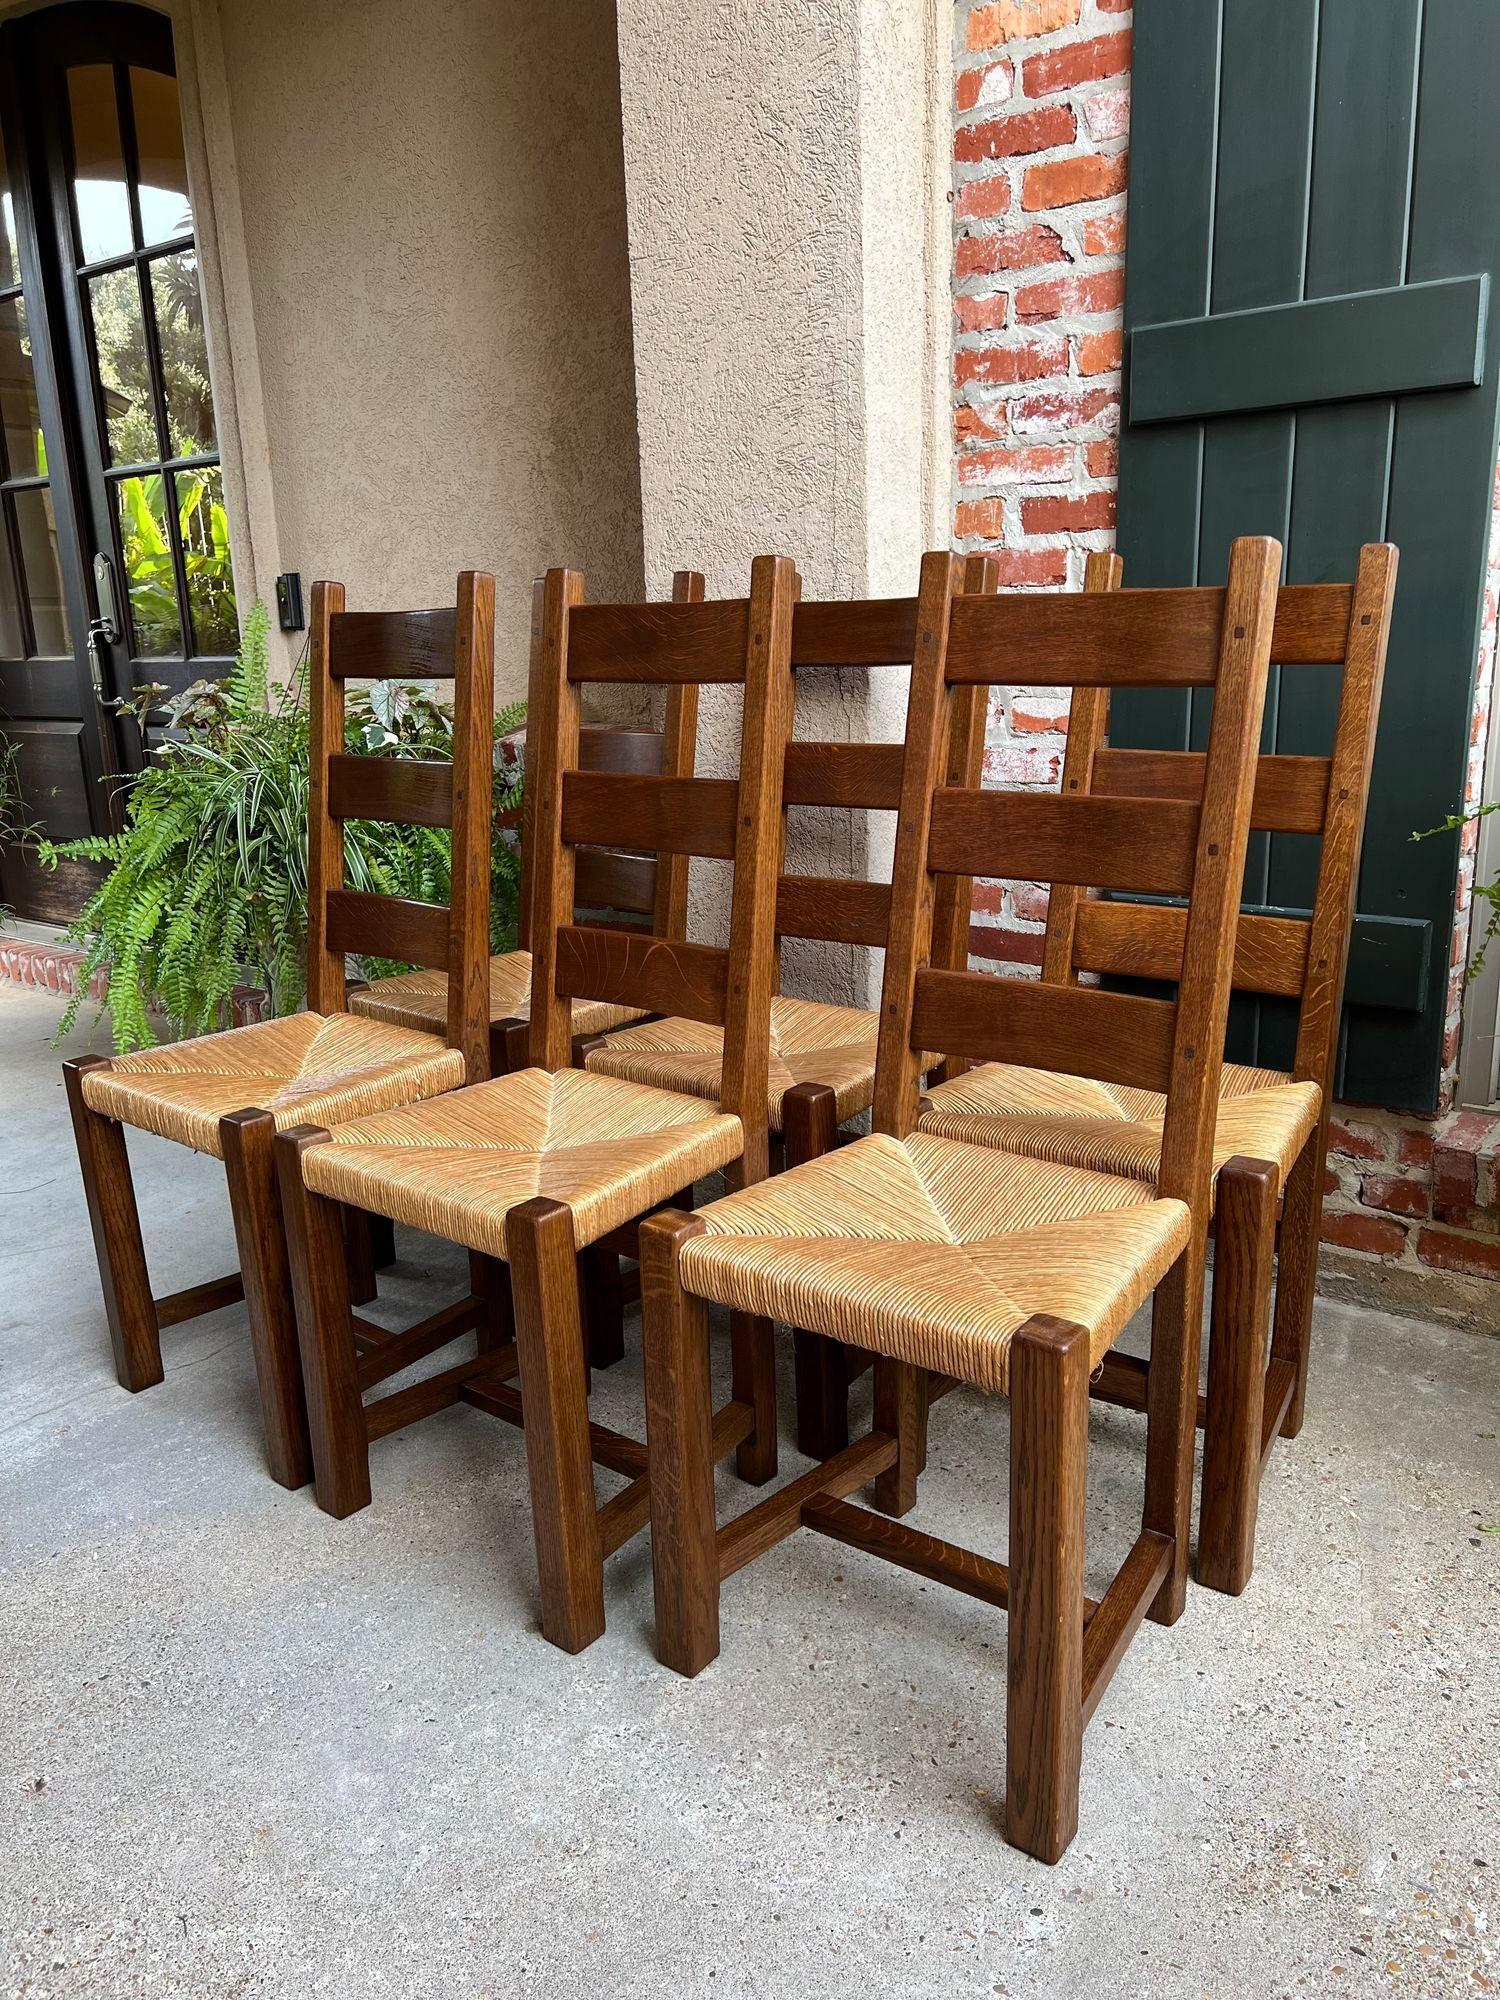 Set 6 Antique French Ladder Back Dining Chairs Carved Oak Rush Seat French Country.
Direct from France, a lovely set of 6 antique French chairs, perfect for either a dining room or kitchen with their classic French Country charm.
The chairs have a